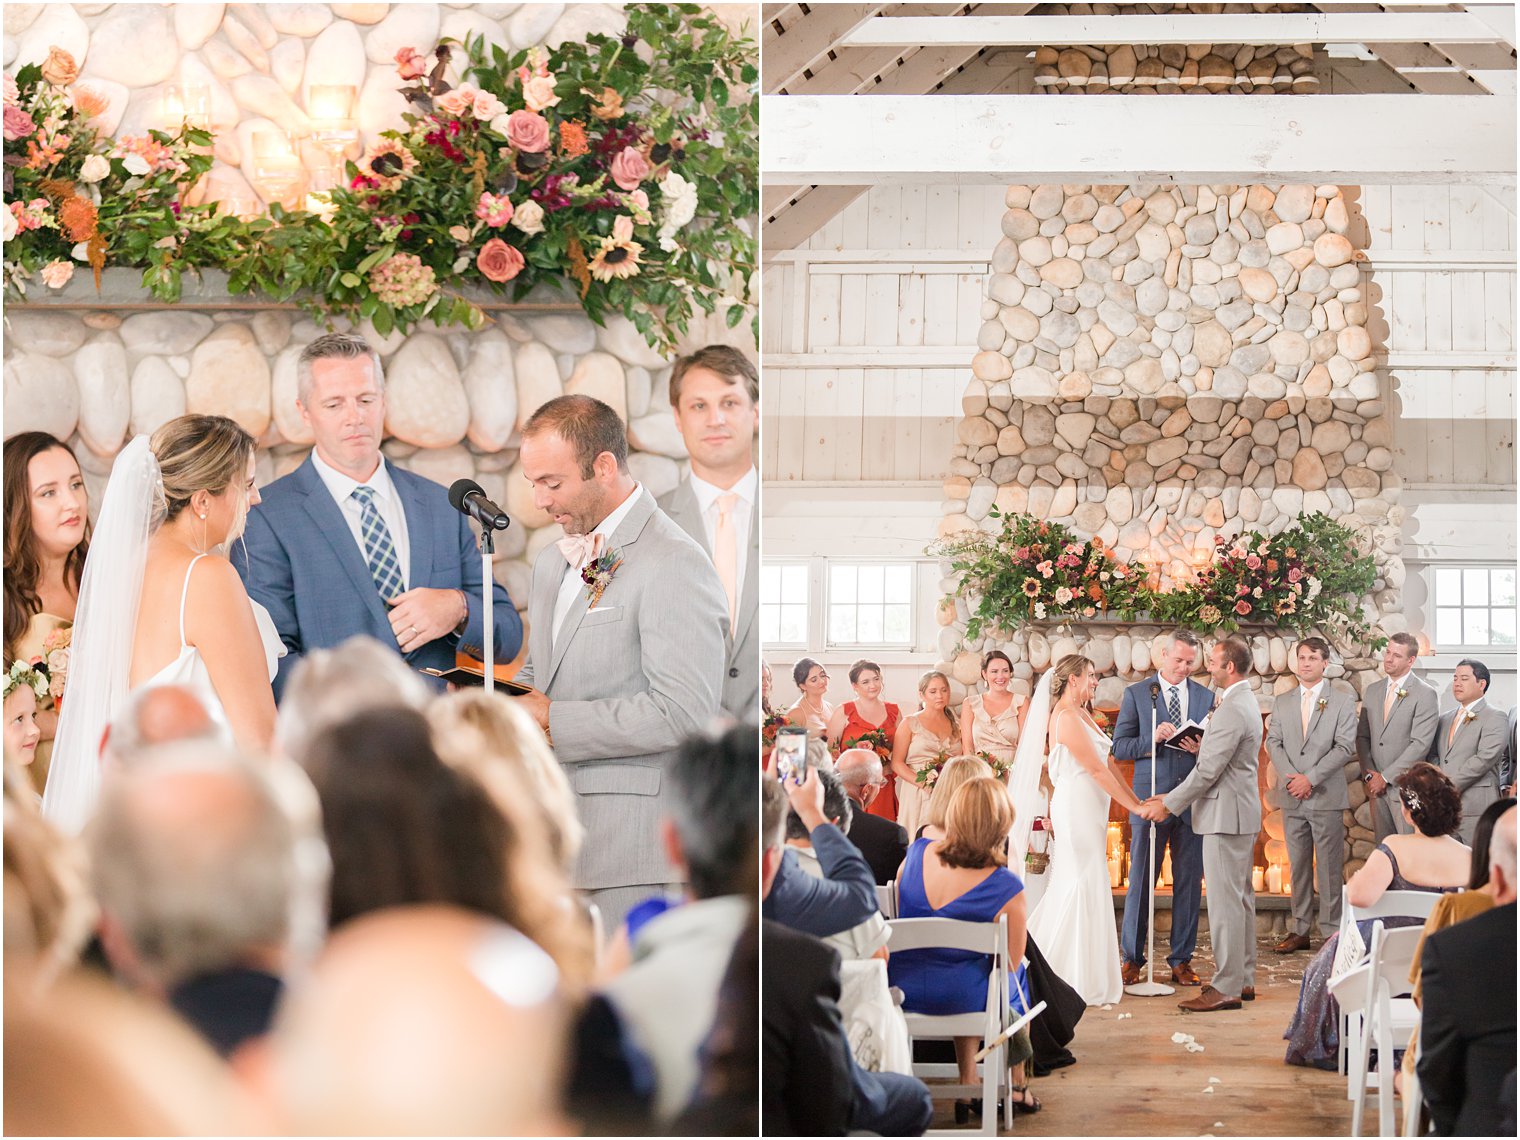 groom reads vows to bride during wedding ceremony in Manahawkin NJ